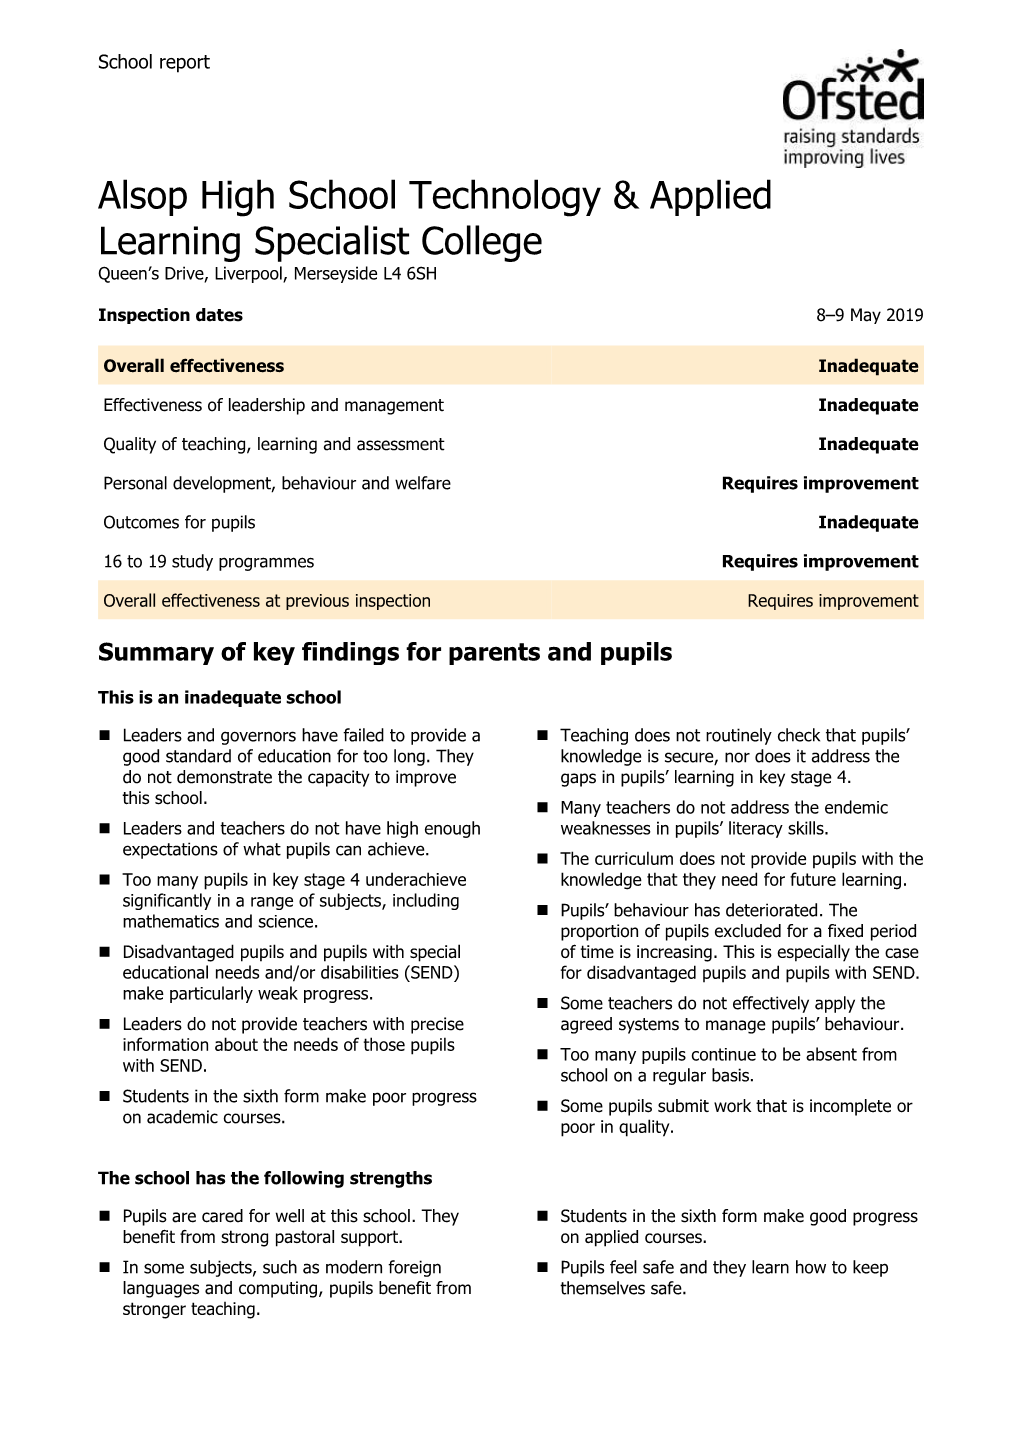 Alsop High School Technology & Applied Learning Specialist College